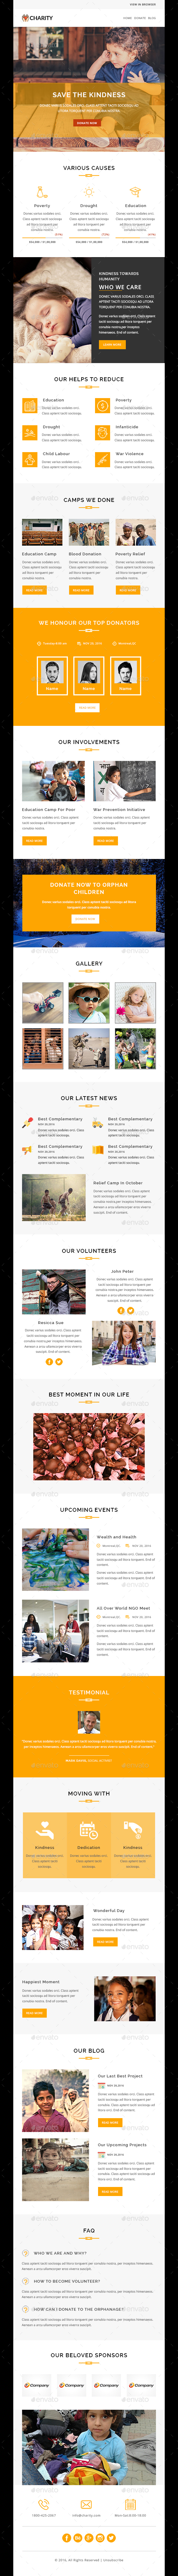 CHARITY - PSD - Multipurpose Responsive Email Template